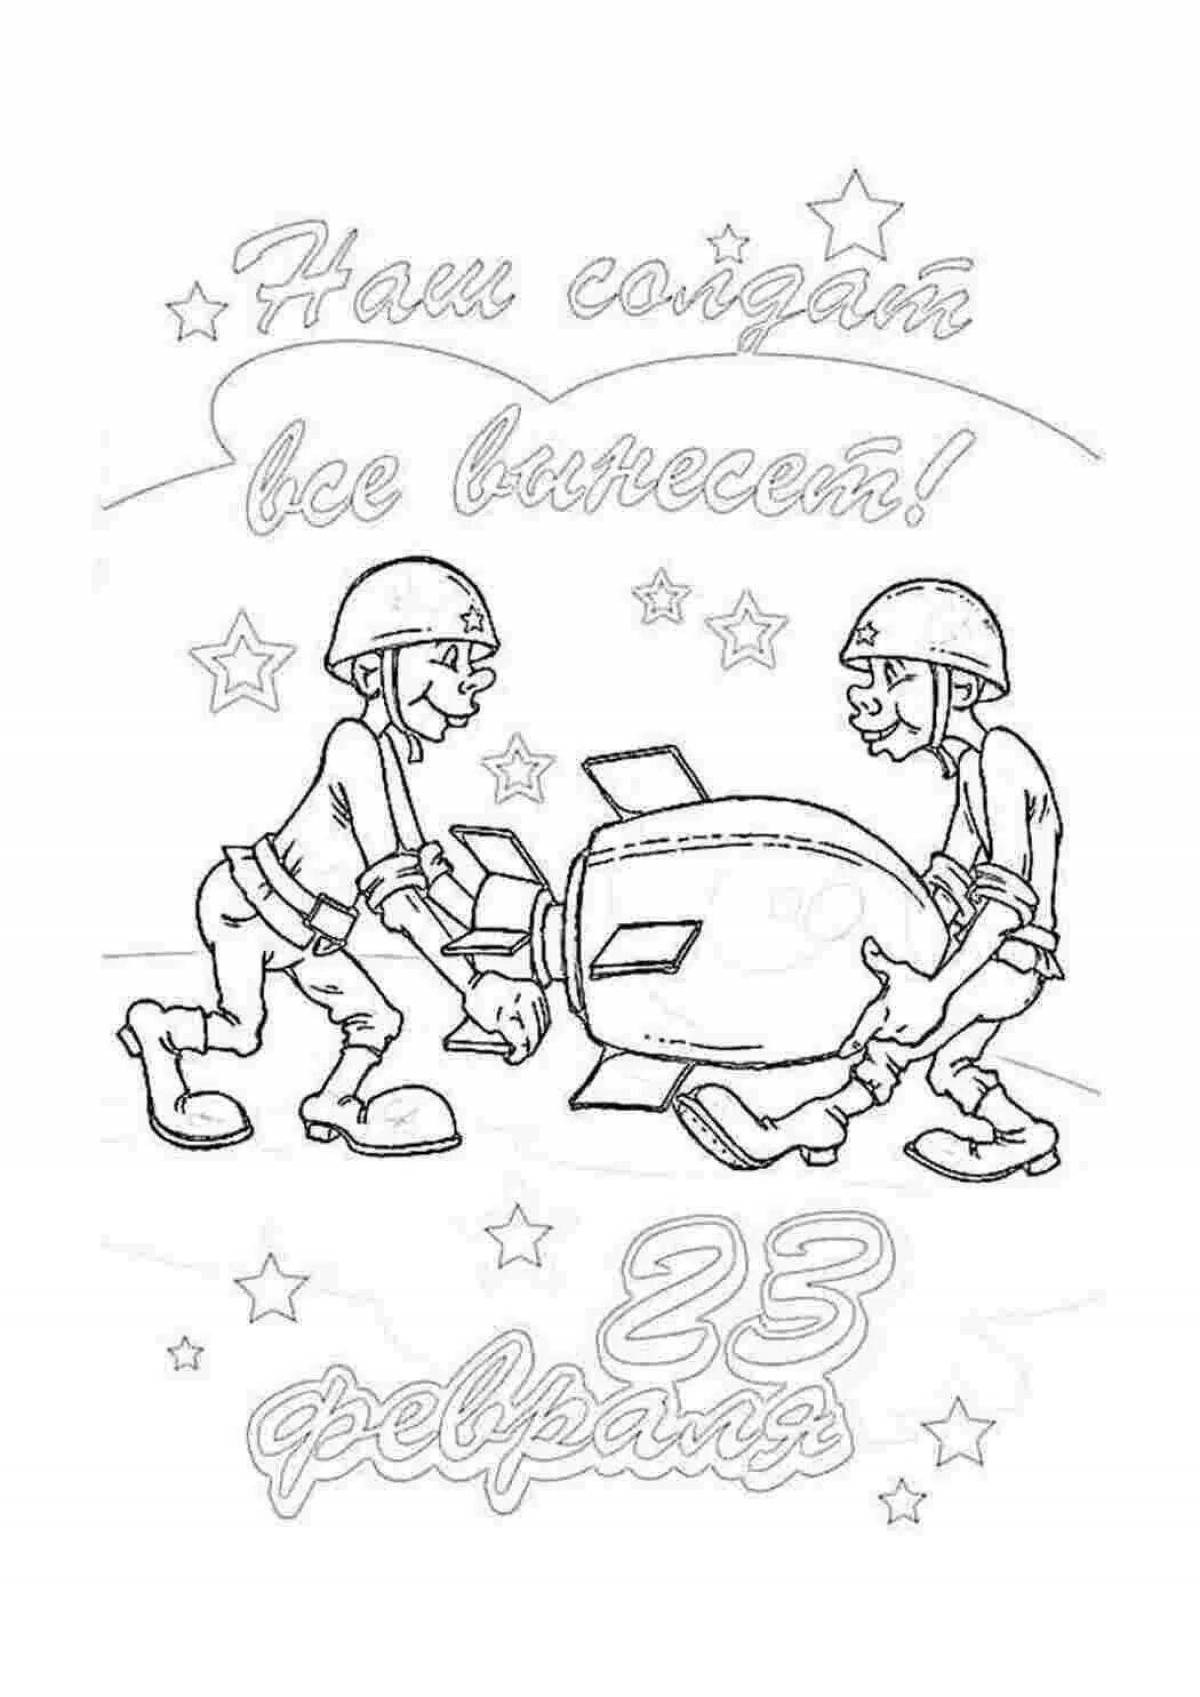 Exciting Defender's Day coloring book